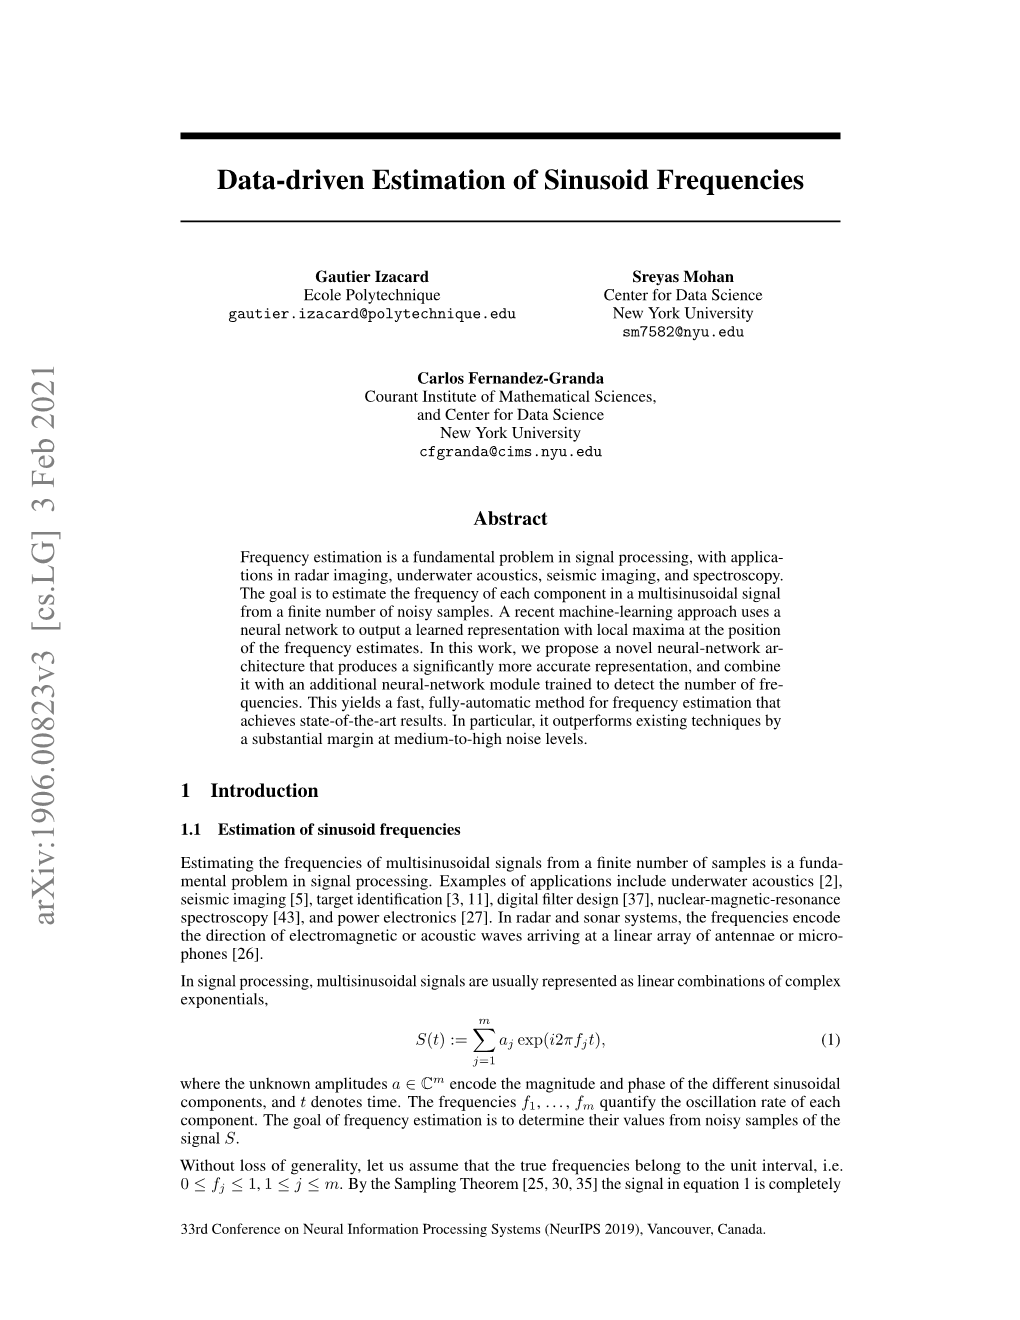 Data-Driven Estimation of Sinusoid Frequencies